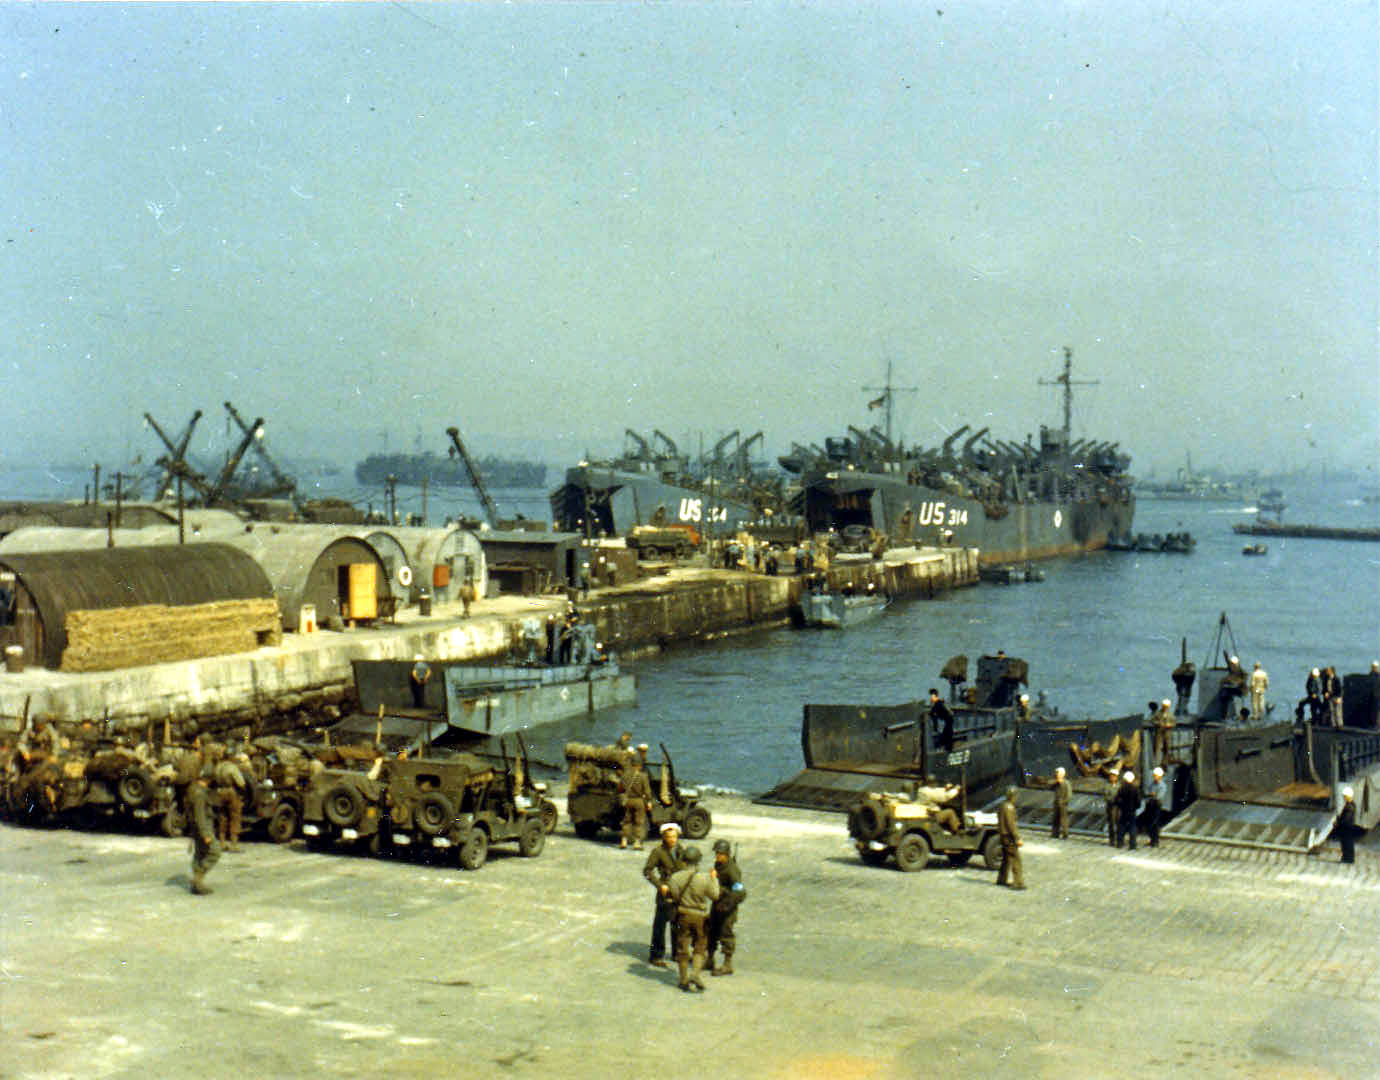 Soldiers load boats and supplies in a harbor. 